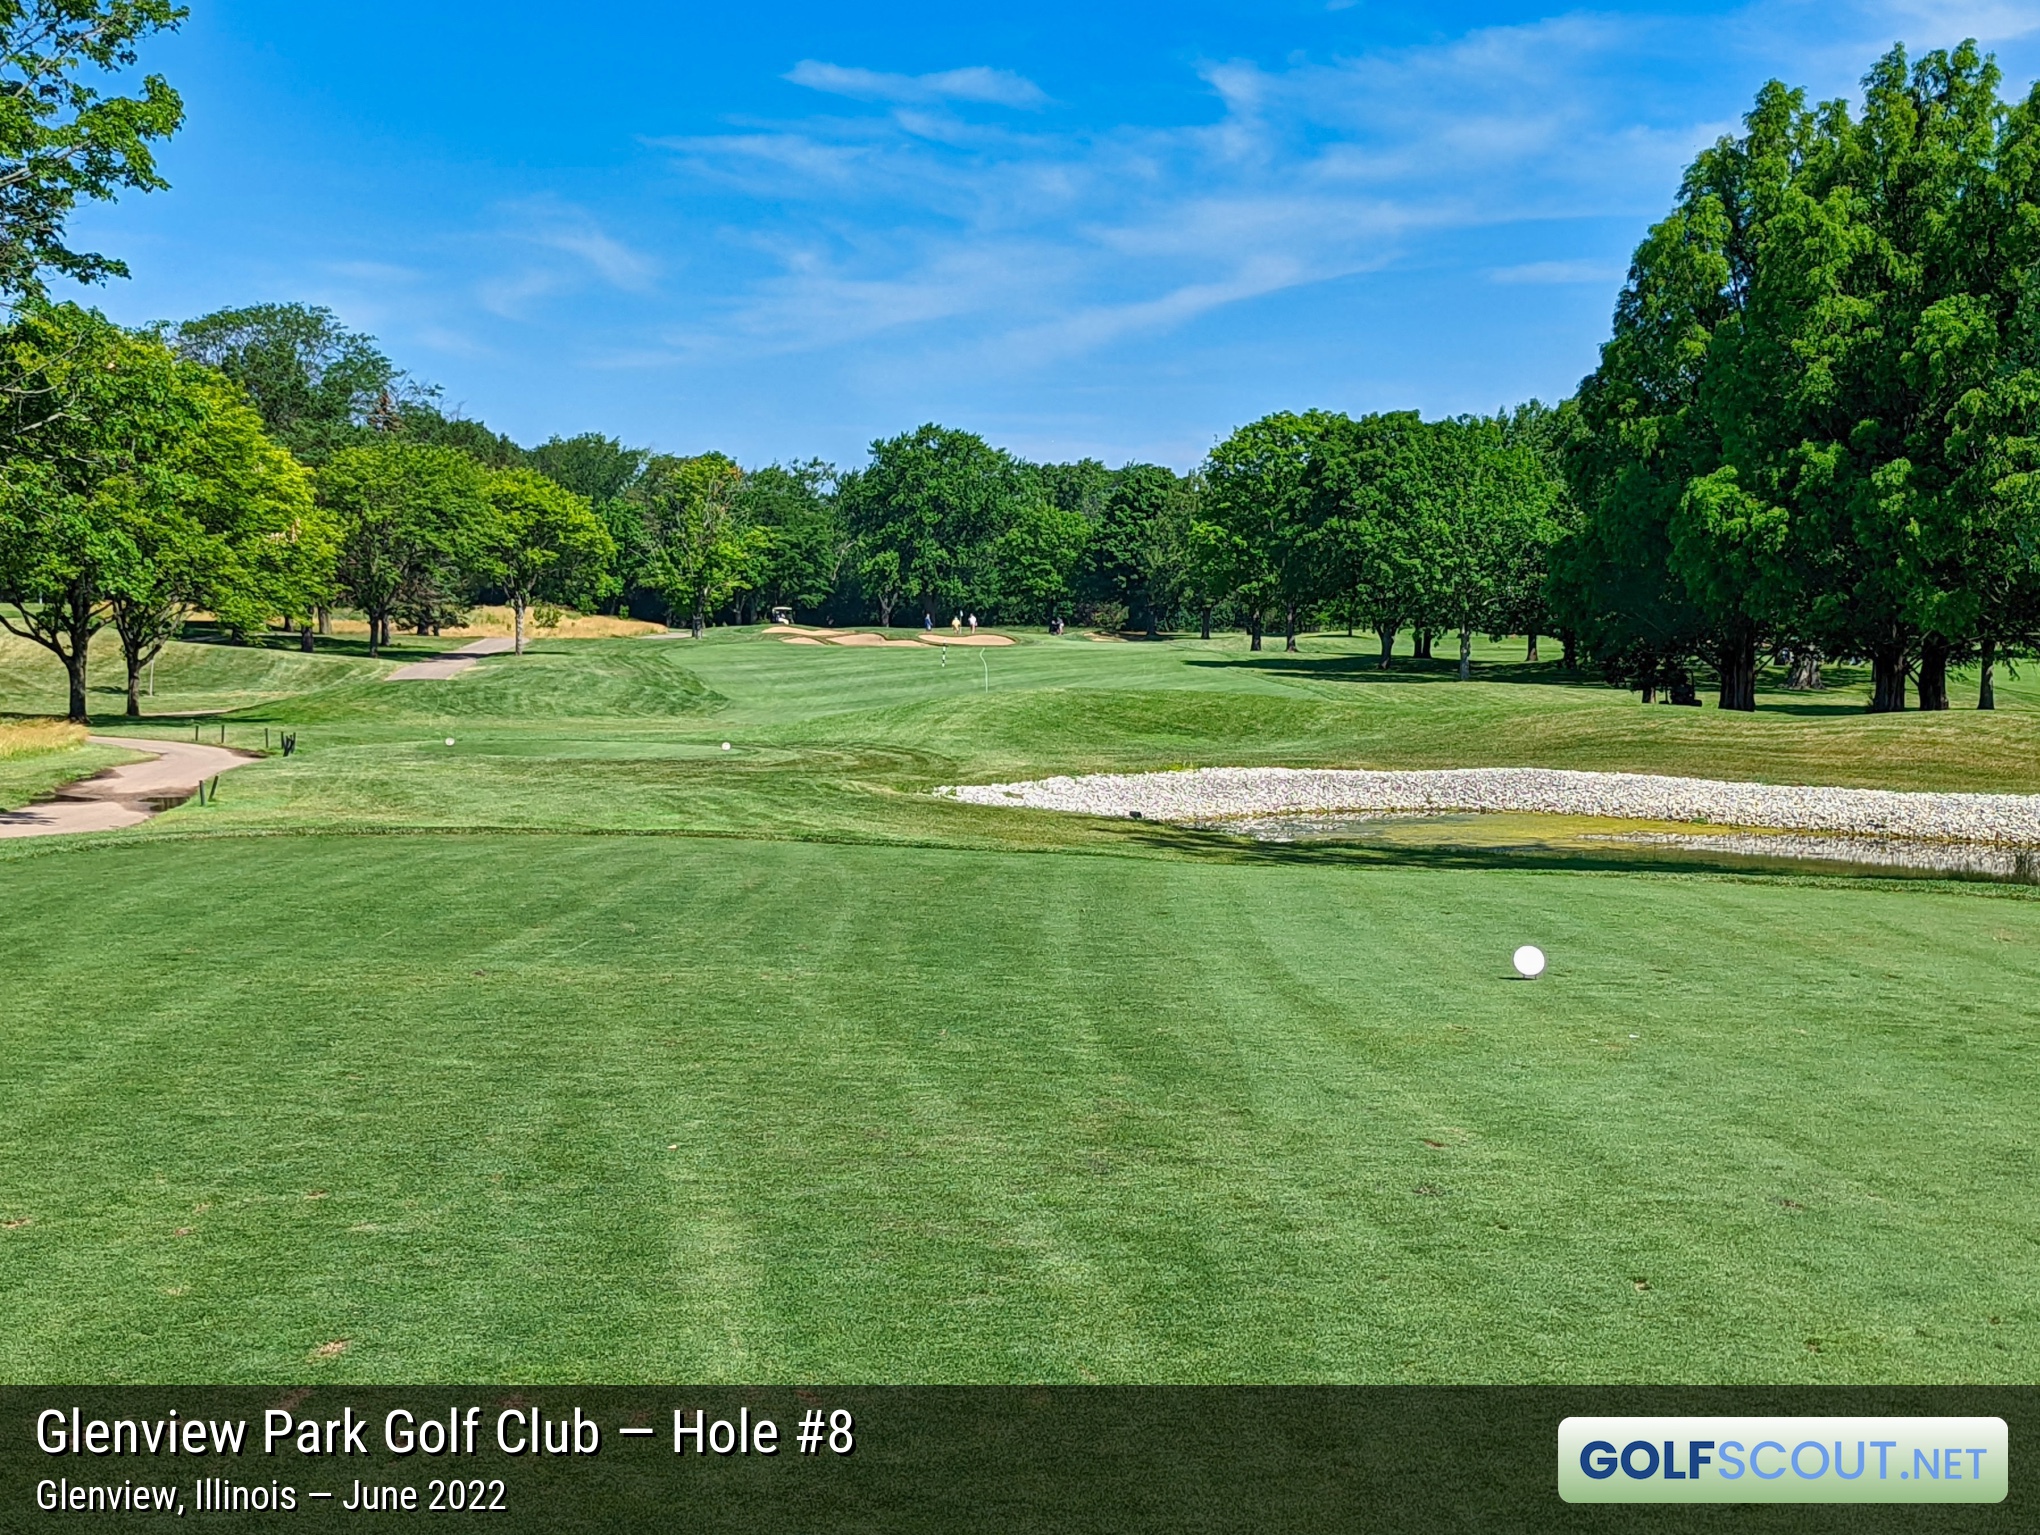 Photo of hole #8 at Glenview Park Golf Club in Glenview, Illinois. 